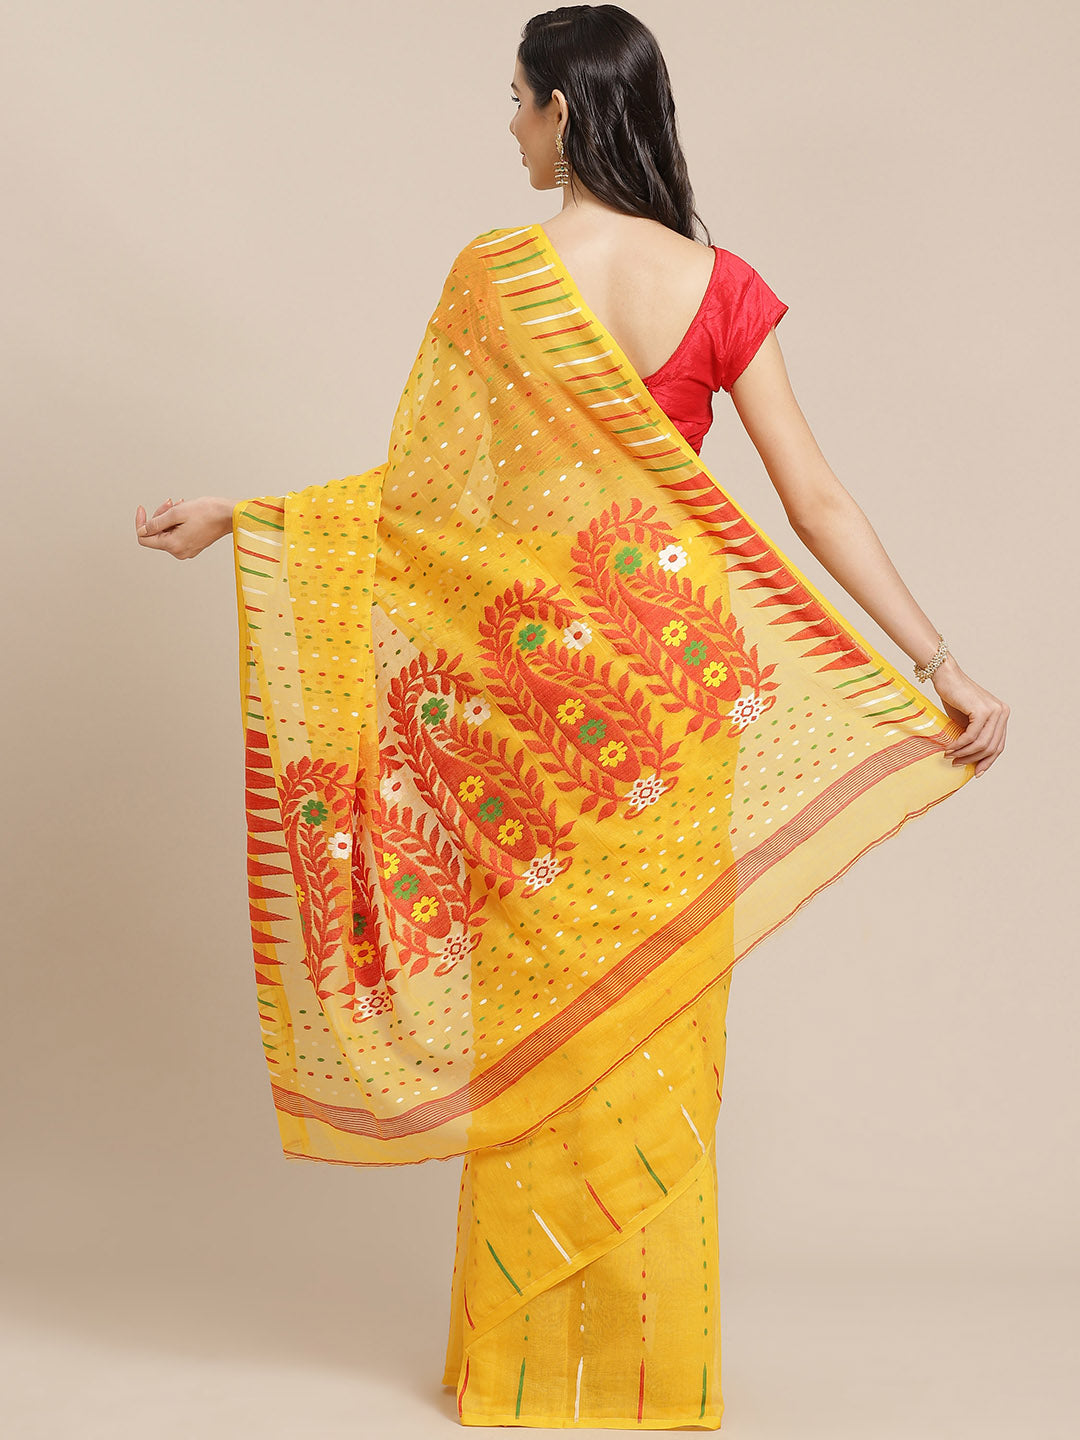 Yellow and Red, Kalakari India Jamdani Silk Cotton Woven Design Saree without blouse CHBHSA0006-Saree-Kalakari India-CHBHSA0006-Bengal, Geographical Indication, Hand Crafted, Hand Painted, Heritage Prints, Jamdani, Natural Dyes, Red, Sarees, Silk Blended, Sustainable Fabrics, Woven, Yellow-[Linen,Ethnic,wear,Fashionista,Handloom,Handicraft,Indigo,blockprint,block,print,Cotton,Chanderi,Blue, latest,classy,party,bollywood,trendy,summer,style,traditional,formal,elegant,unique,style,hand,block,print